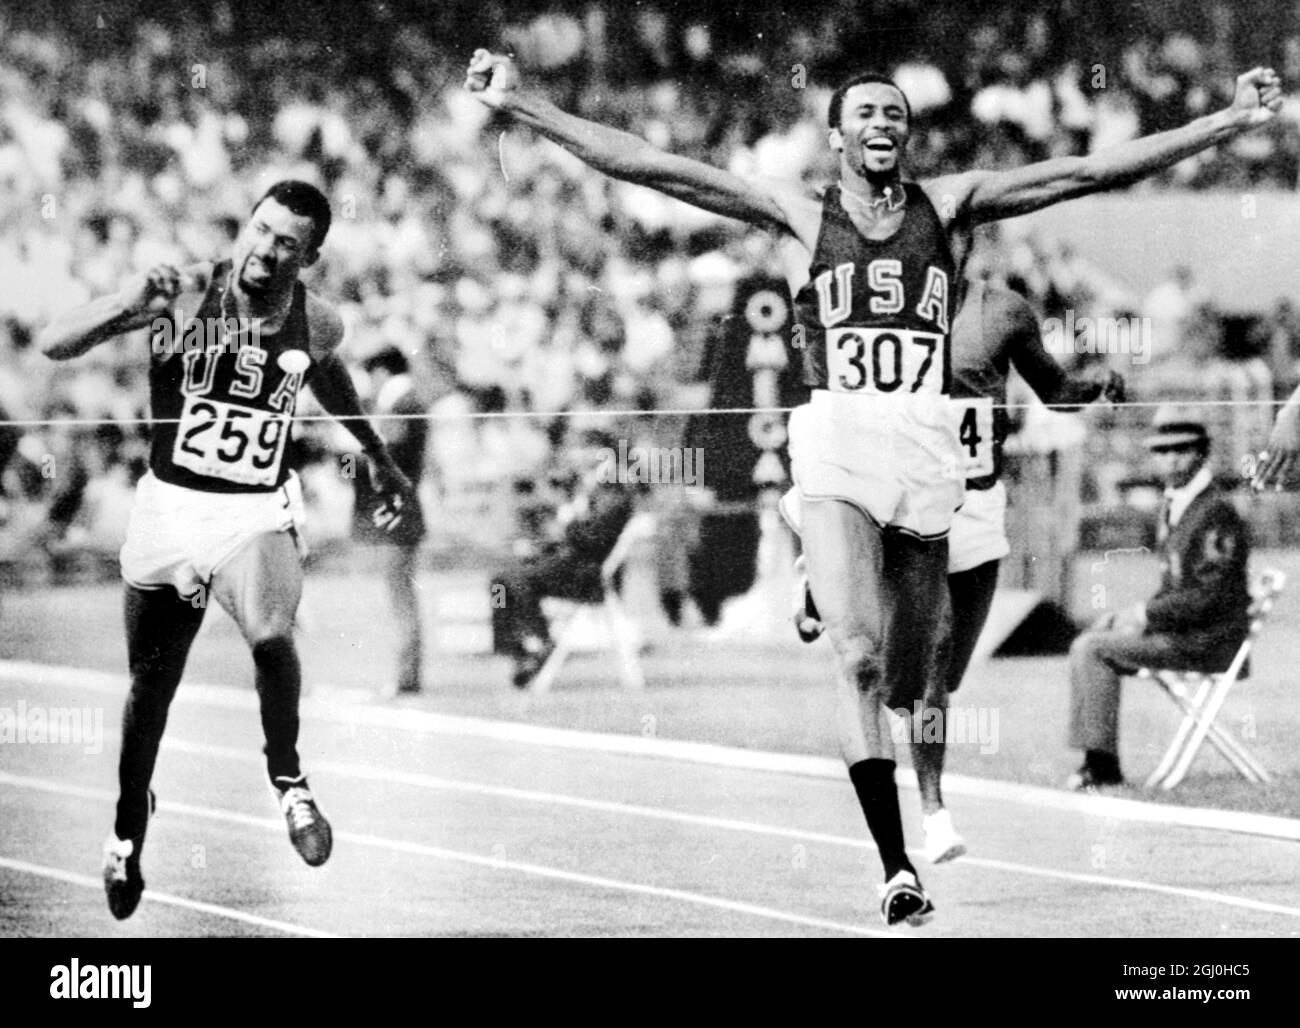 Mexico City: Tommie Smith, of Lemoore, Calif., Throws his arms up in victory as he its the tape to win a Gold Medal in the Men's 200 - meters final at the 19th Olympic Games her yesterday. his time of 19.8 seconds set a new world record. Running despite an injured leg muscle, he streaked past team mate John Carlos, of San Jose, Calif., (left), who was placed third behind Australia's Peter Norman, who won the Silver Medal 17 October 1968 Stock Photo